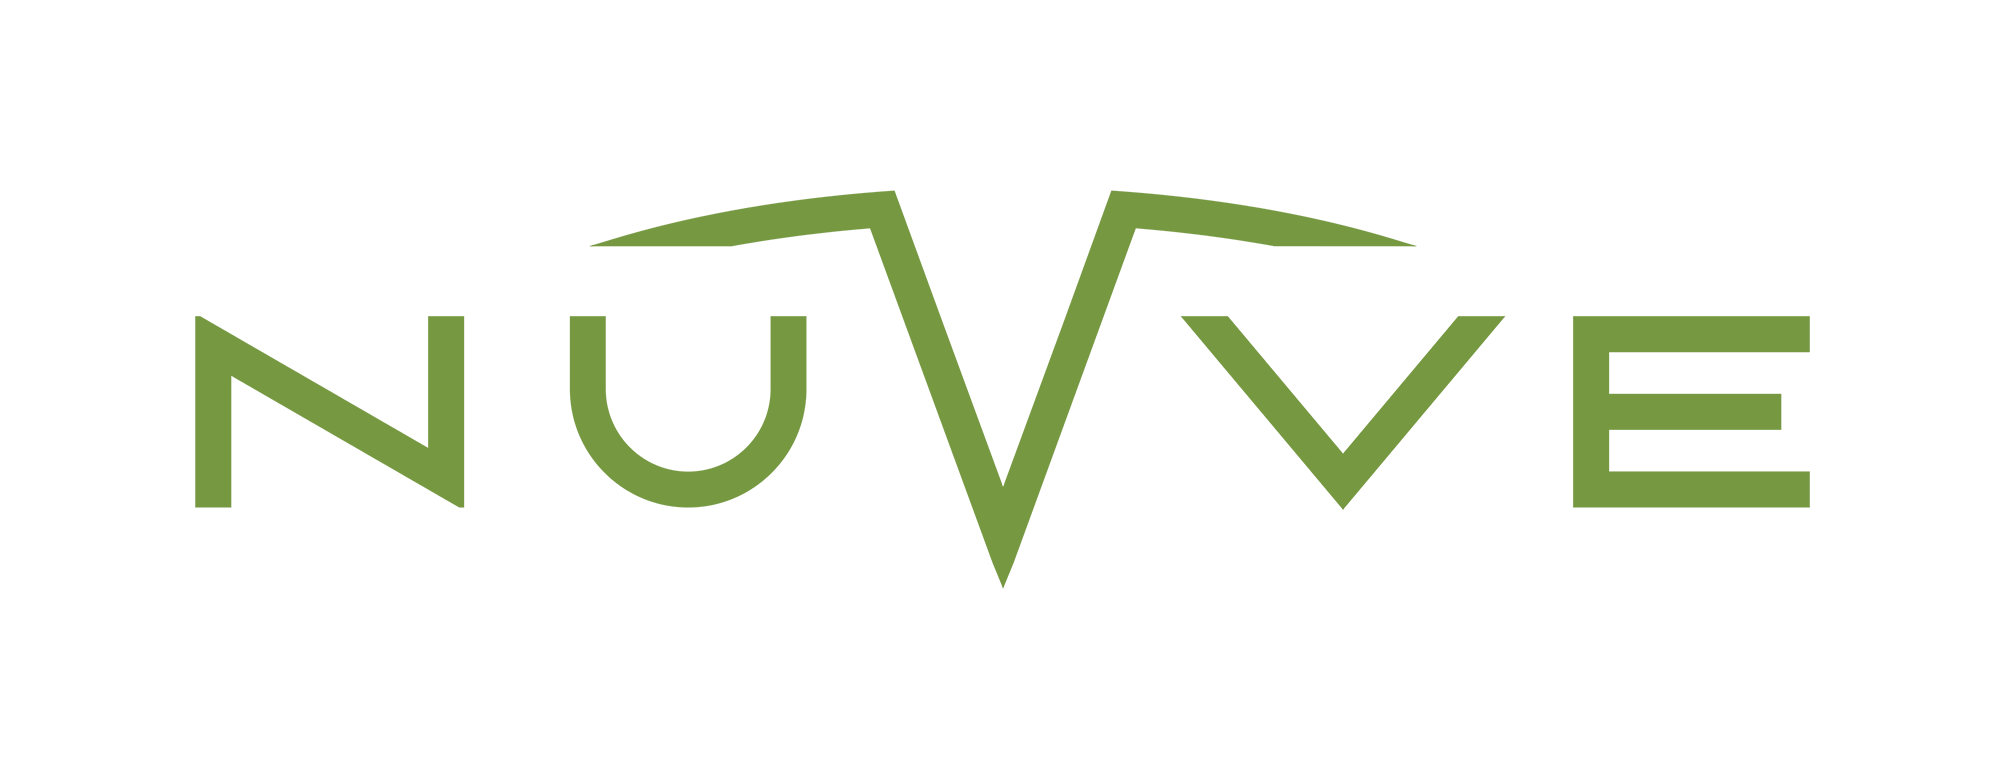 Nuvve & Great Power partner to accelerate battery integration